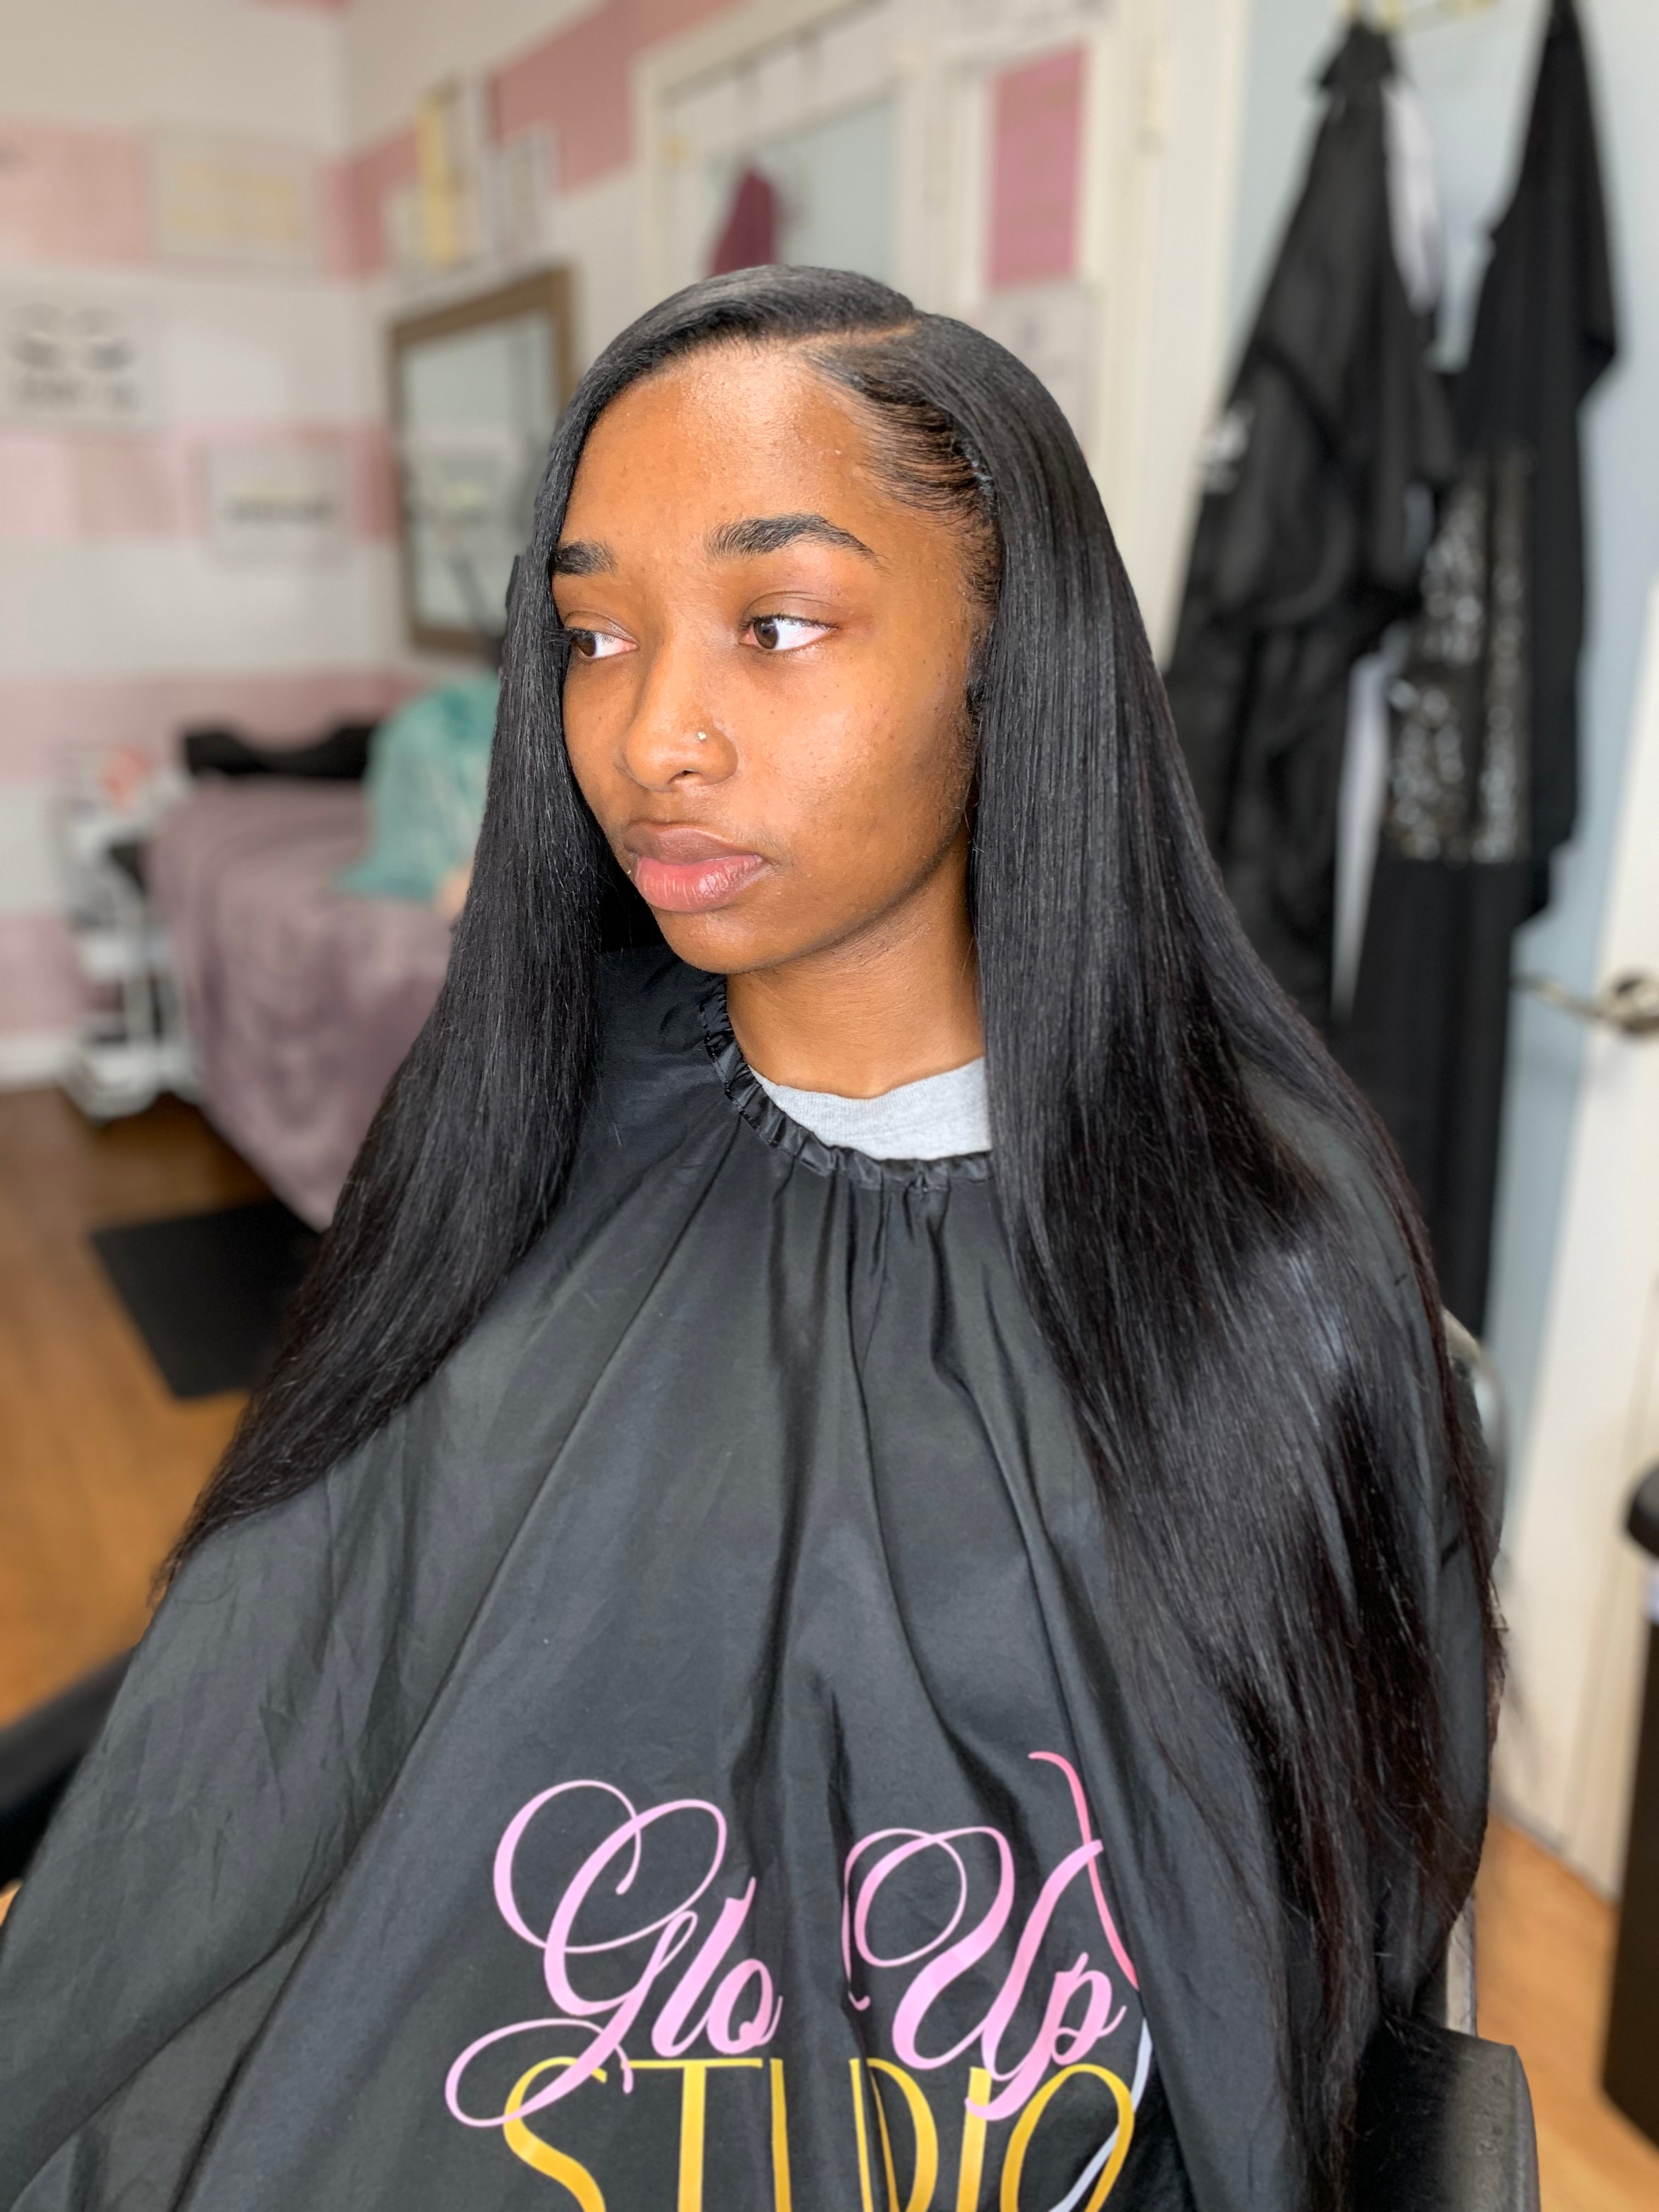 Glo Up Virgin Hair extensions